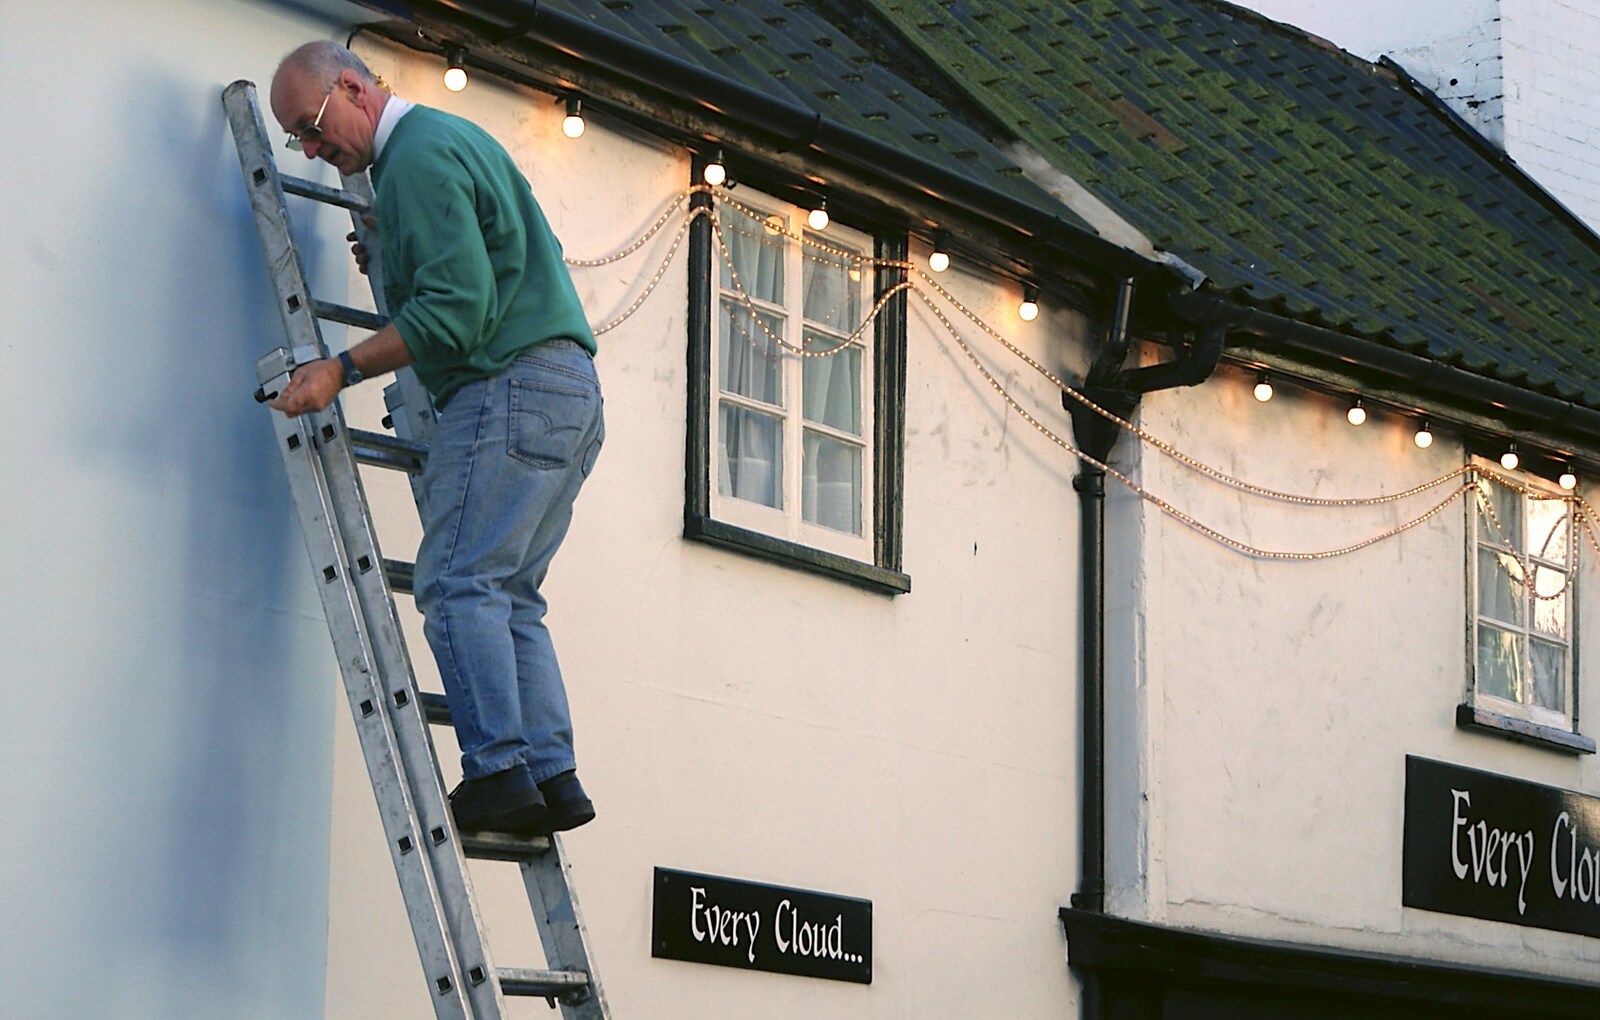 Roger's up a ladder, installing lights from Christmas Lights and St. Mary's Church, Diss, Norfolk - 29th November 2004